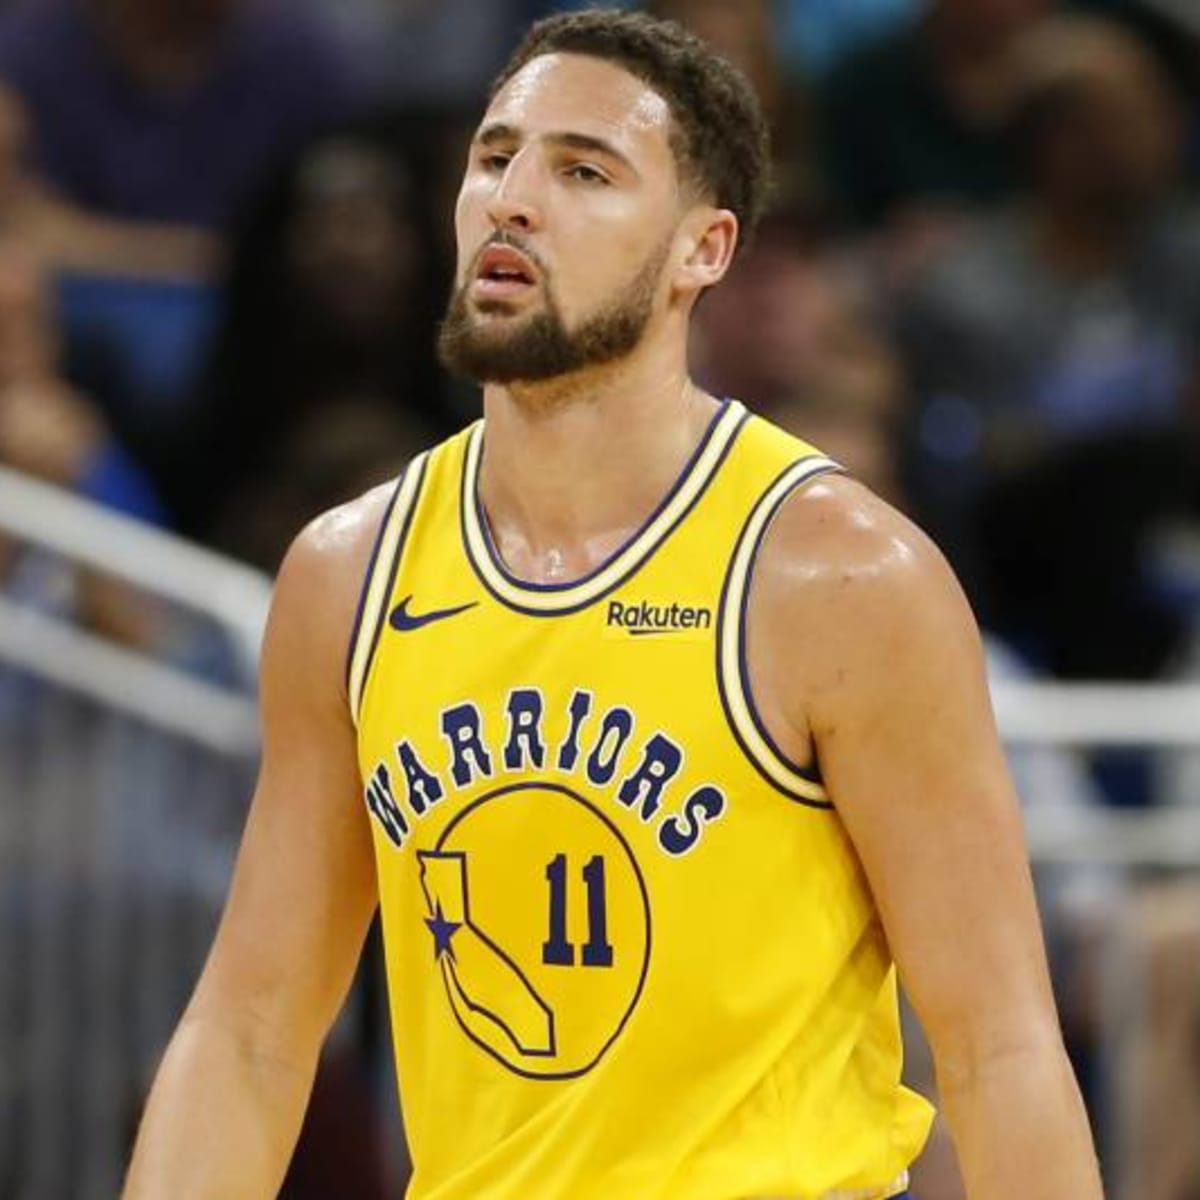 what number is klay thompson